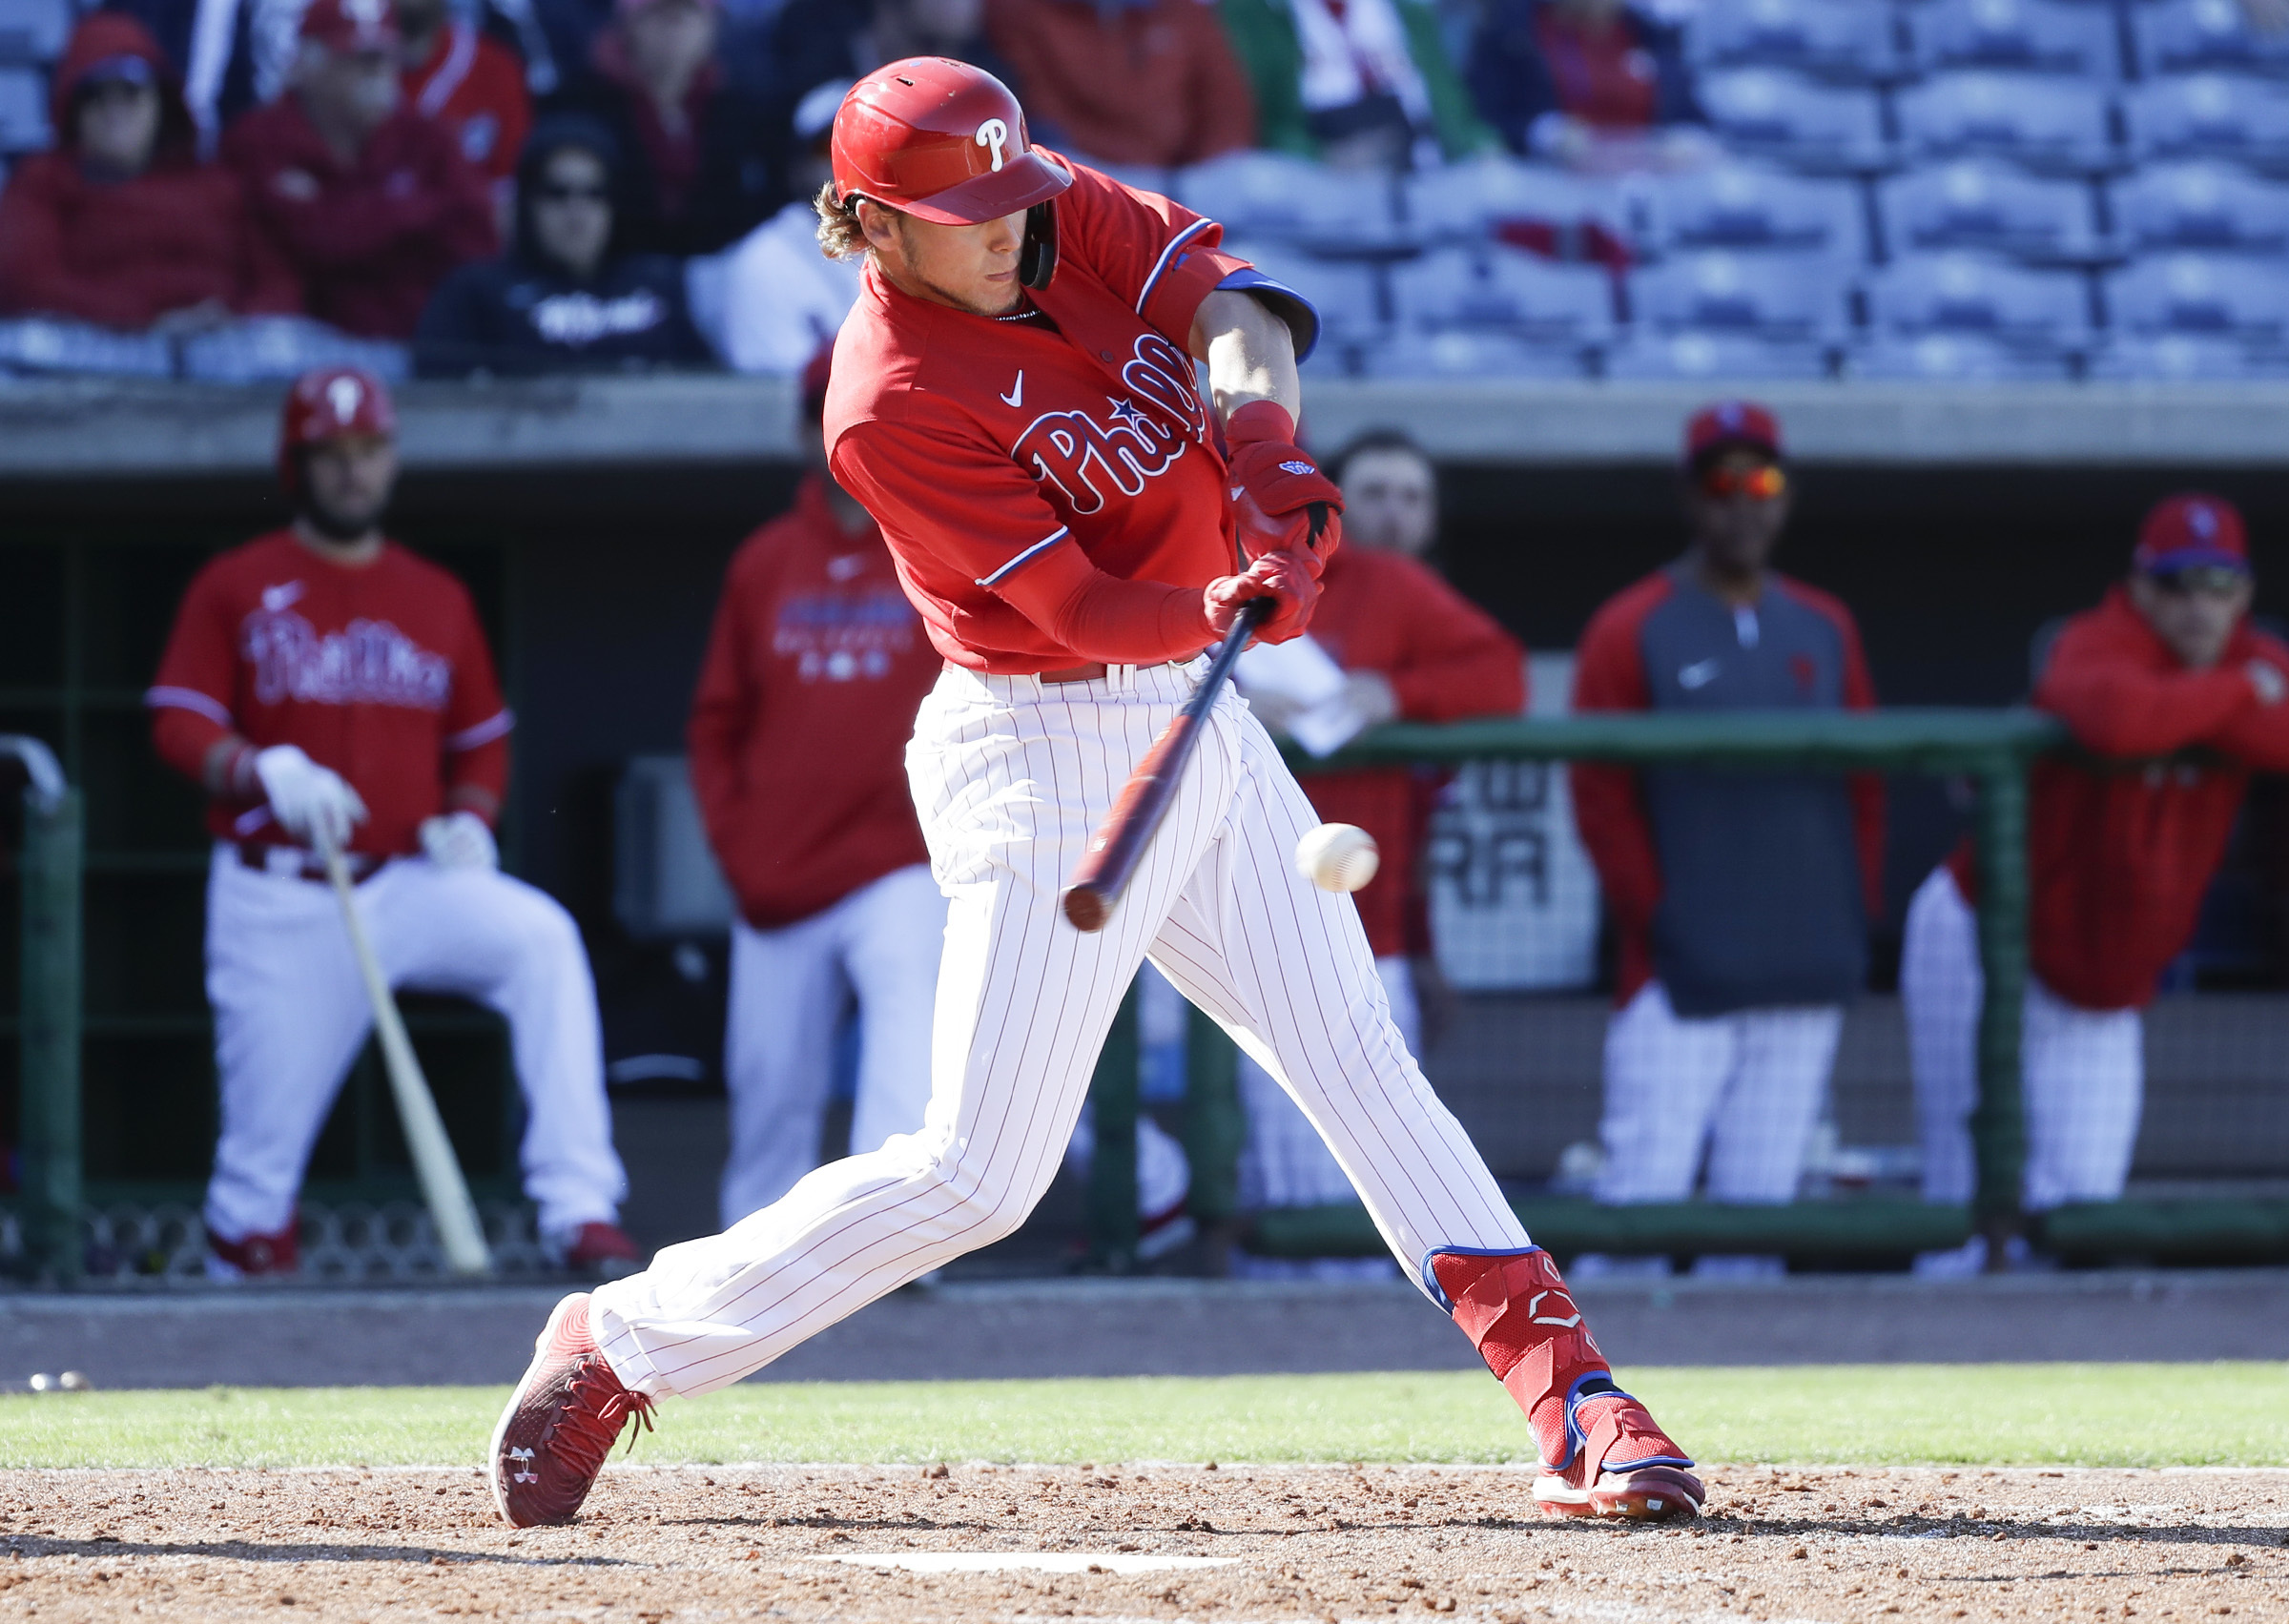 Philadelphia Phillies call up Alec Bohm, their top position player prospect  – Reading Eagle